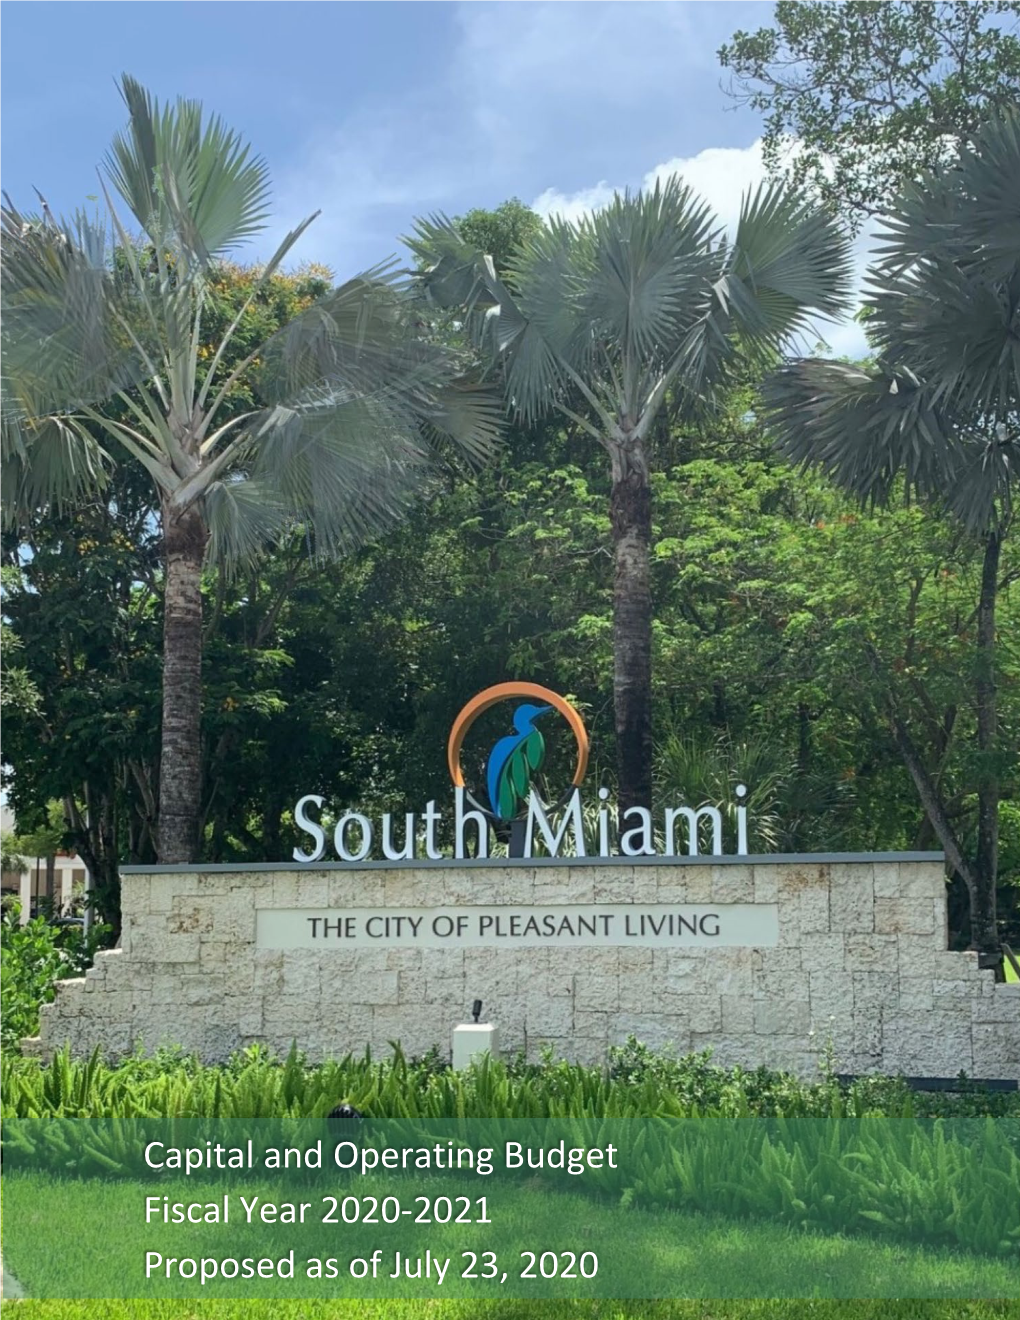 City of South Miami, Florida for Its Annual Budget for the Fiscal Year Beginning October 1, 2019